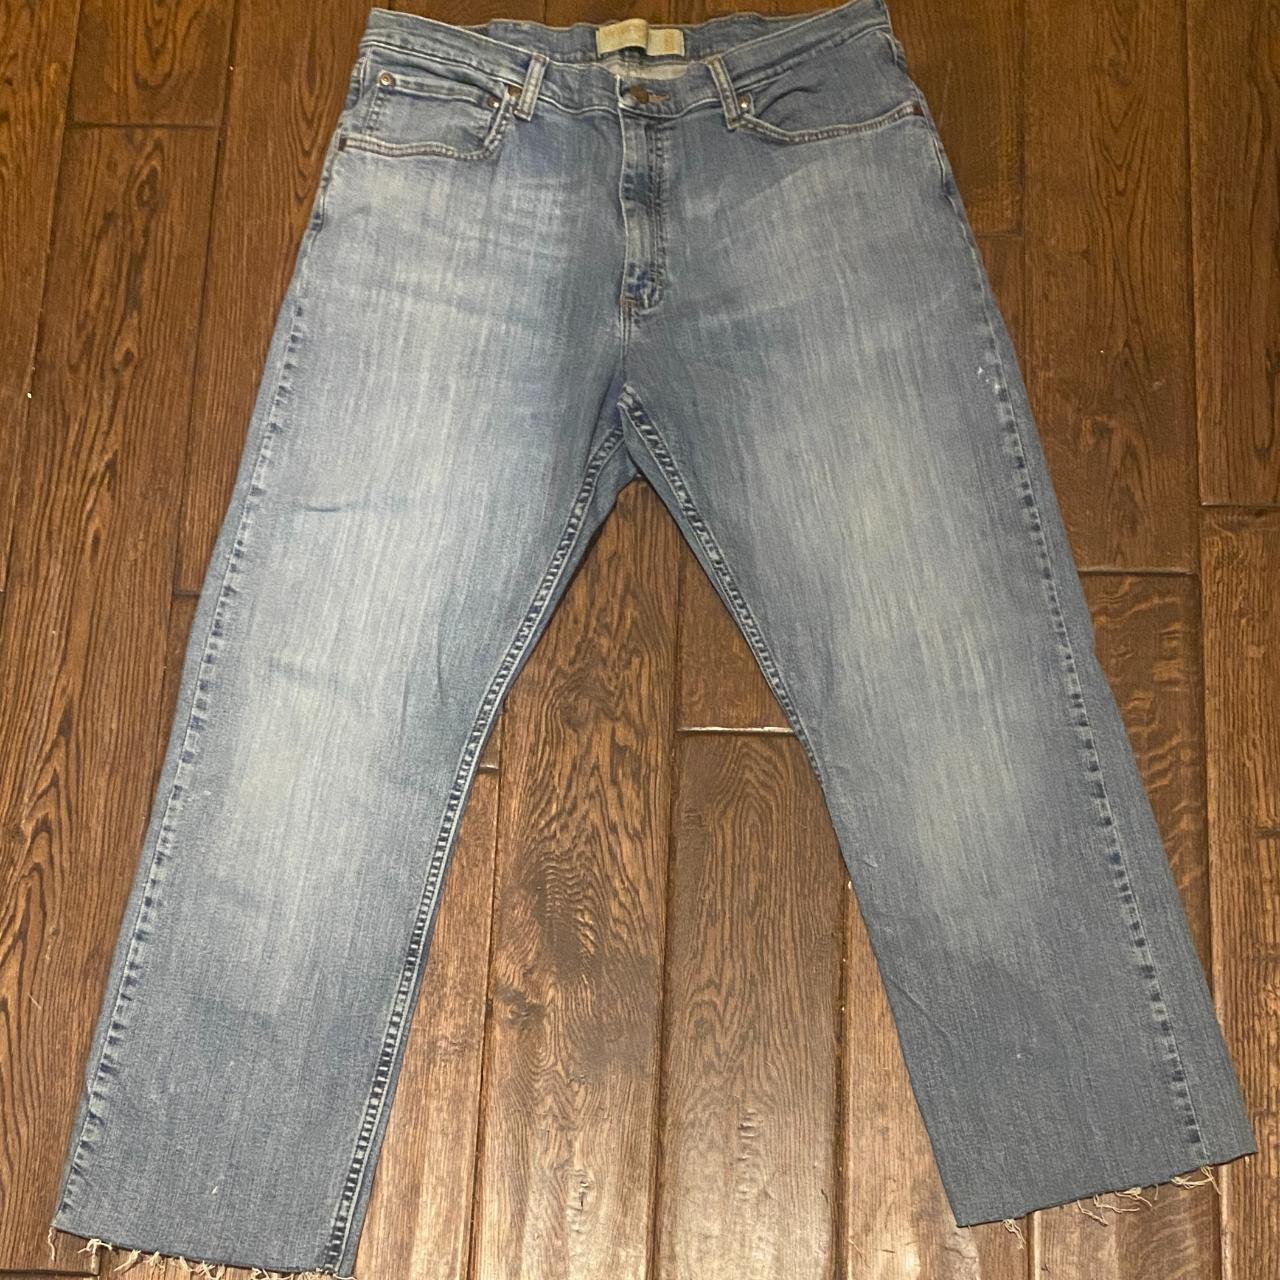 Distressed Relaxed fit wrangler jeans with a small... - Depop